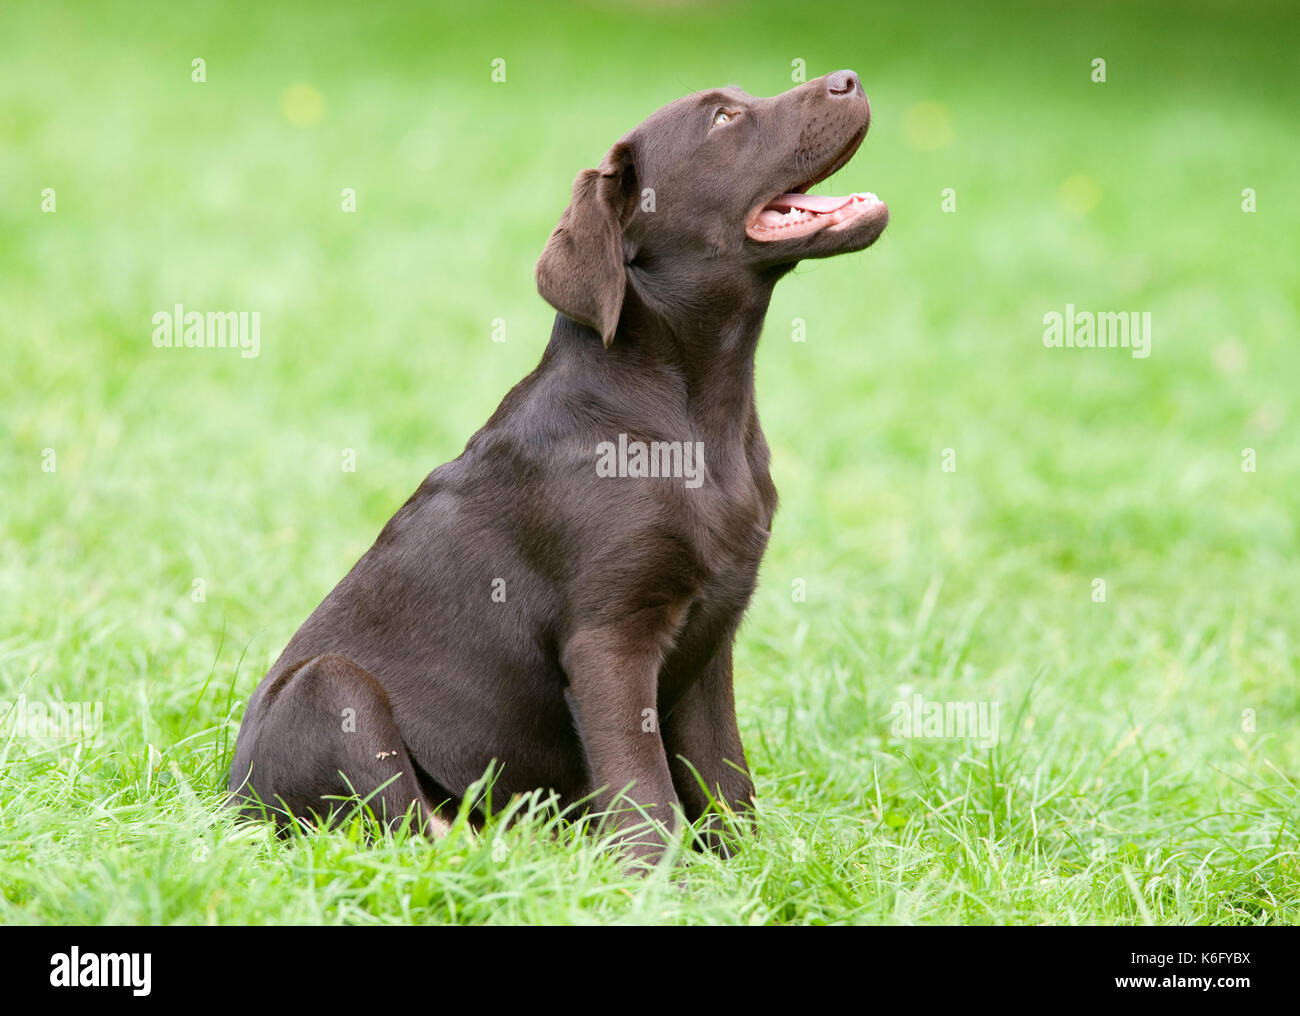 Labrador Puppies Uk High Resolution Stock Photography and Images - Alamy